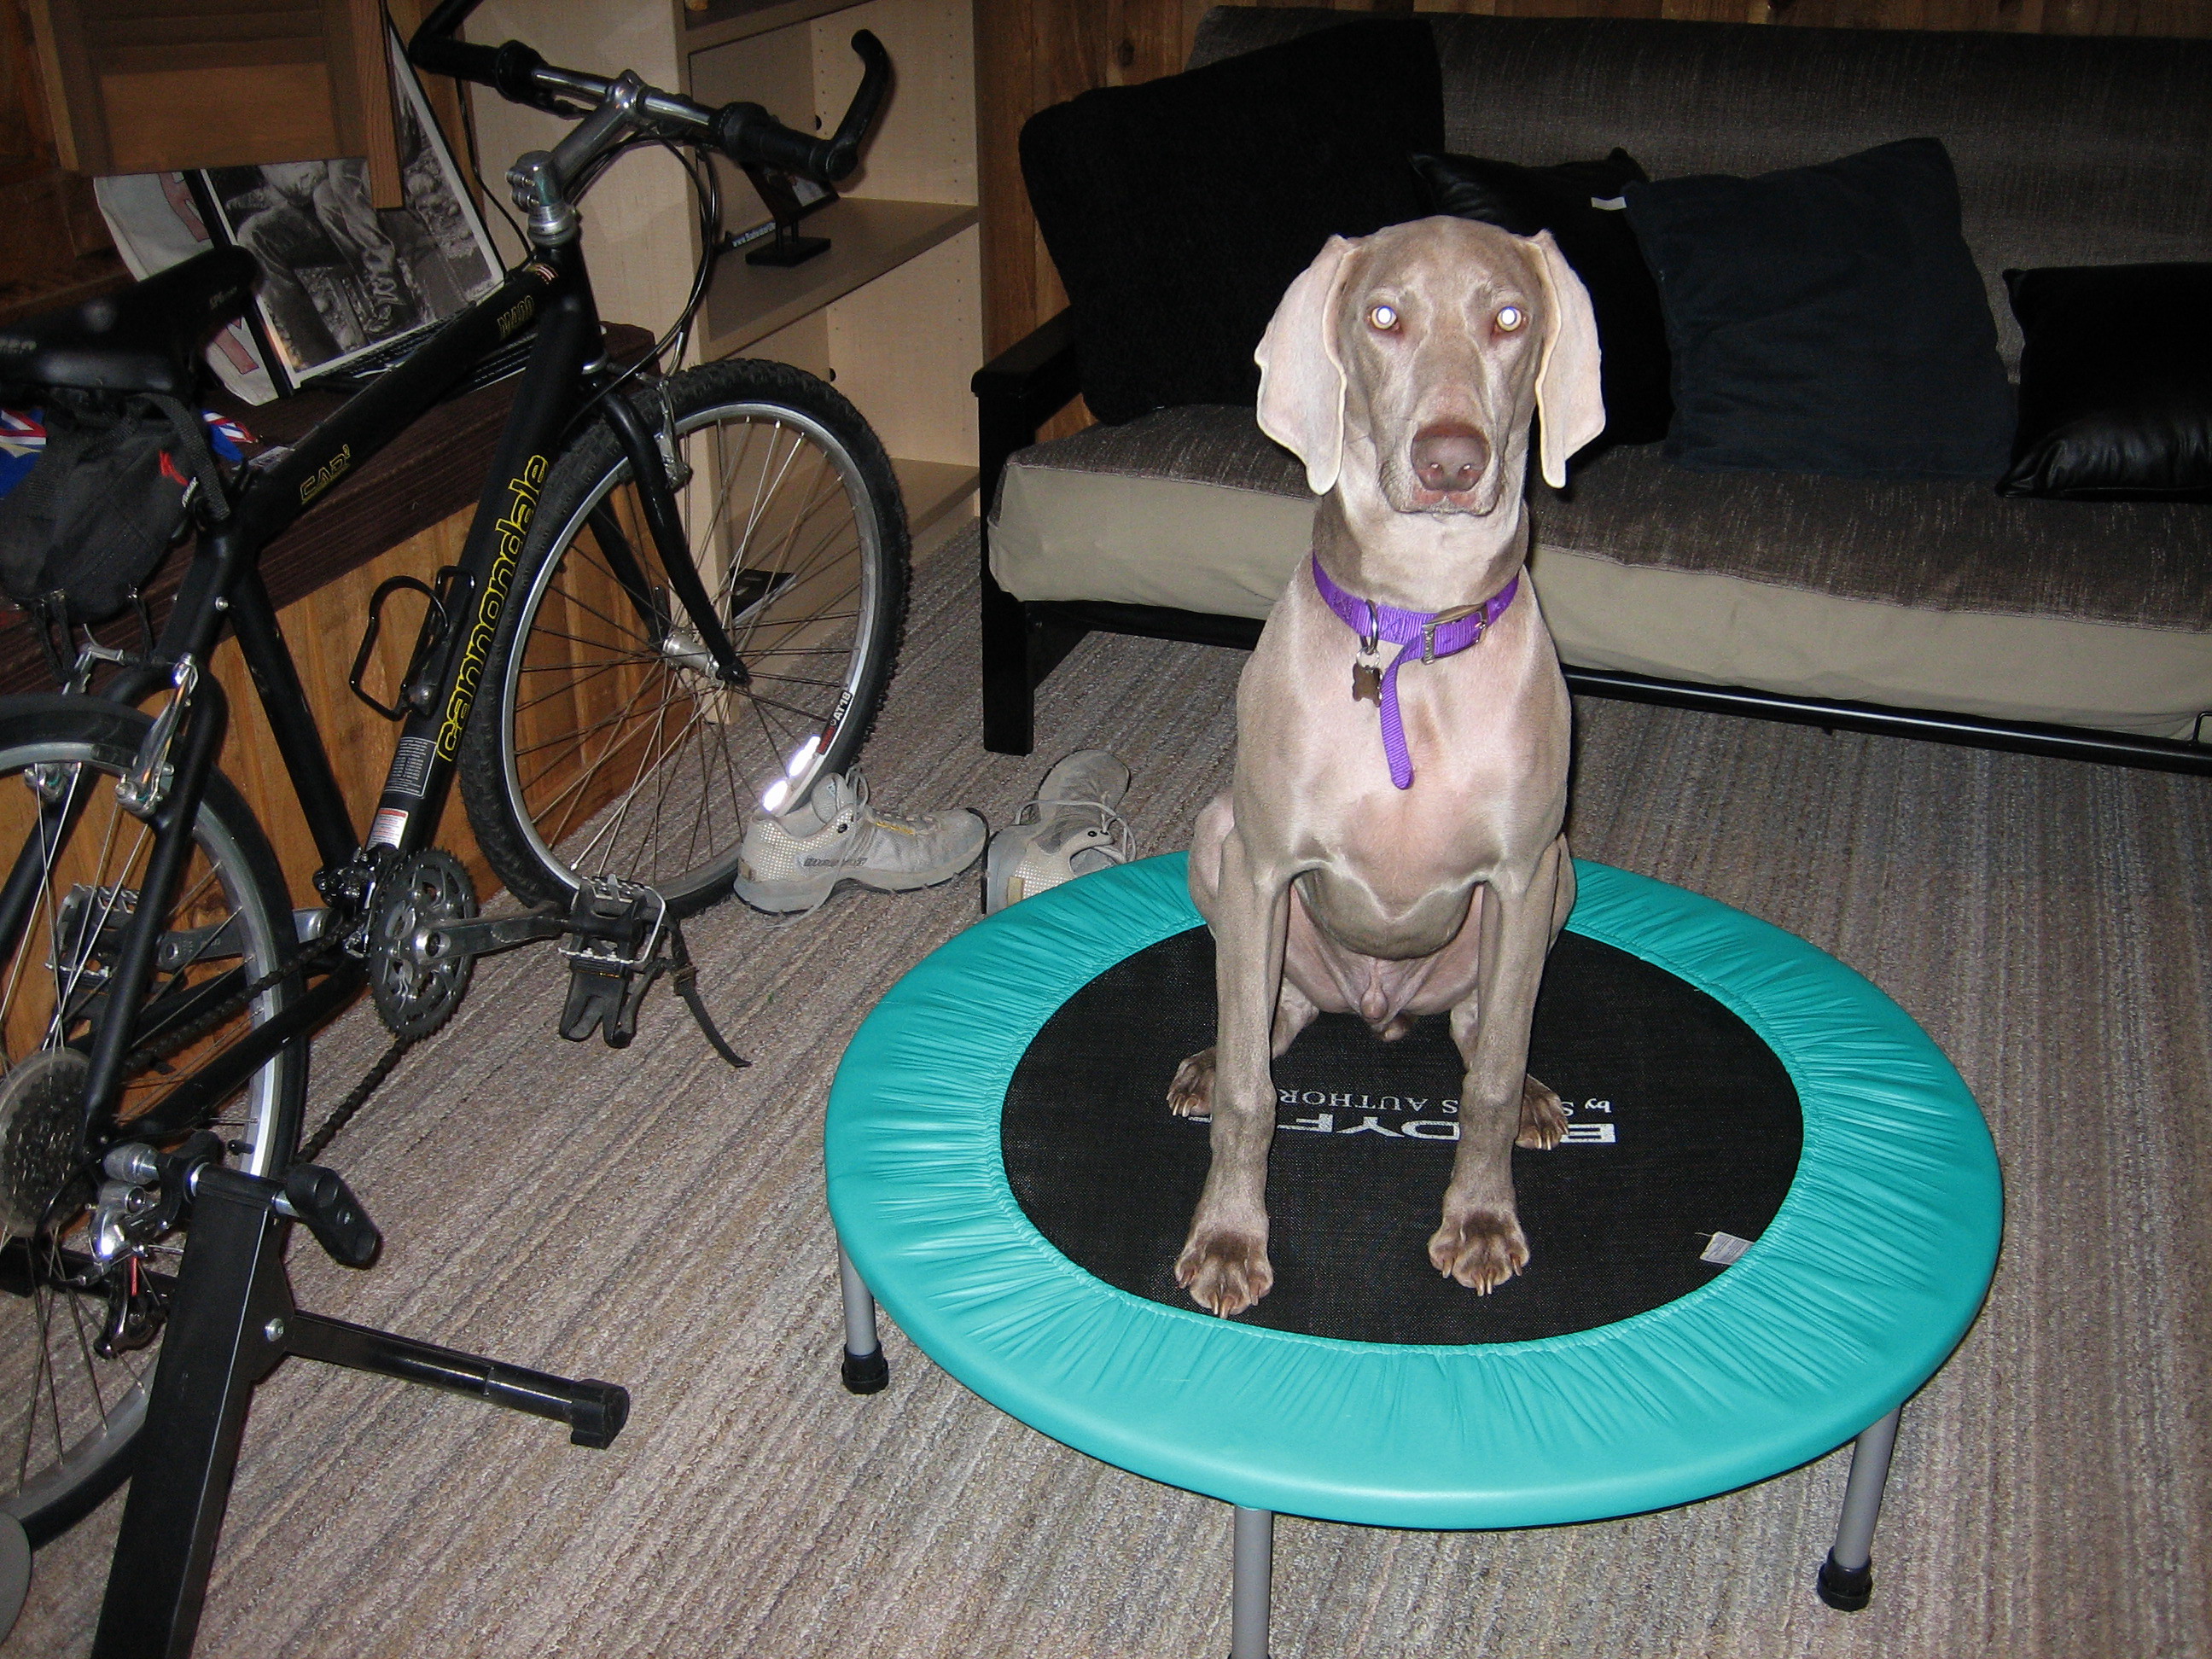 Then, when I get on the treadmill, he takes over the rebounder.  Wish I had his energy and motivation!